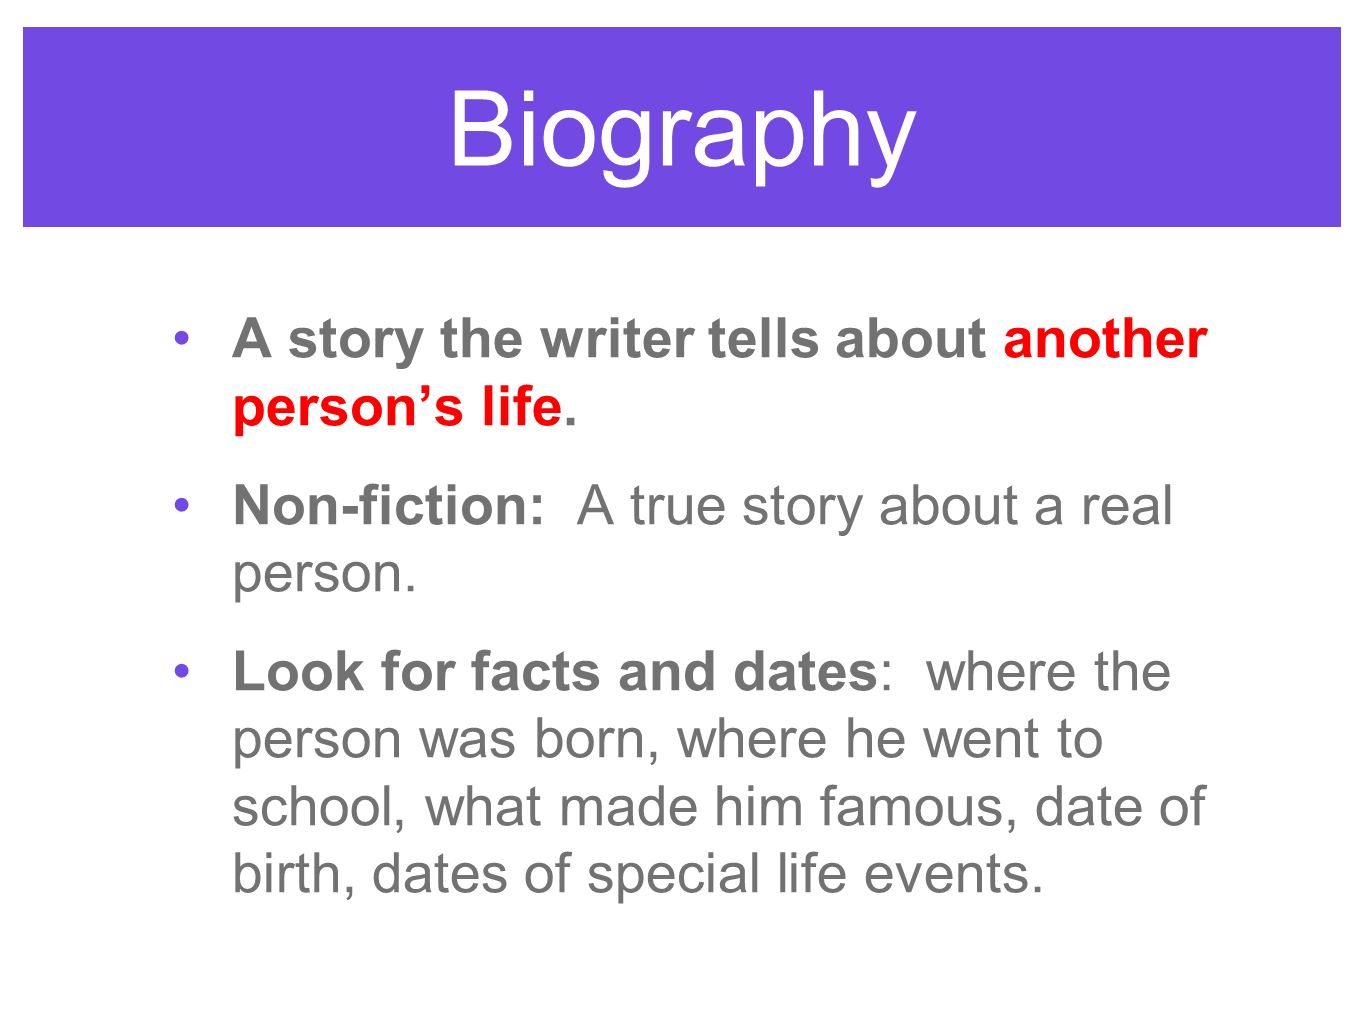 Biography A story the writer tells about another person’s life.